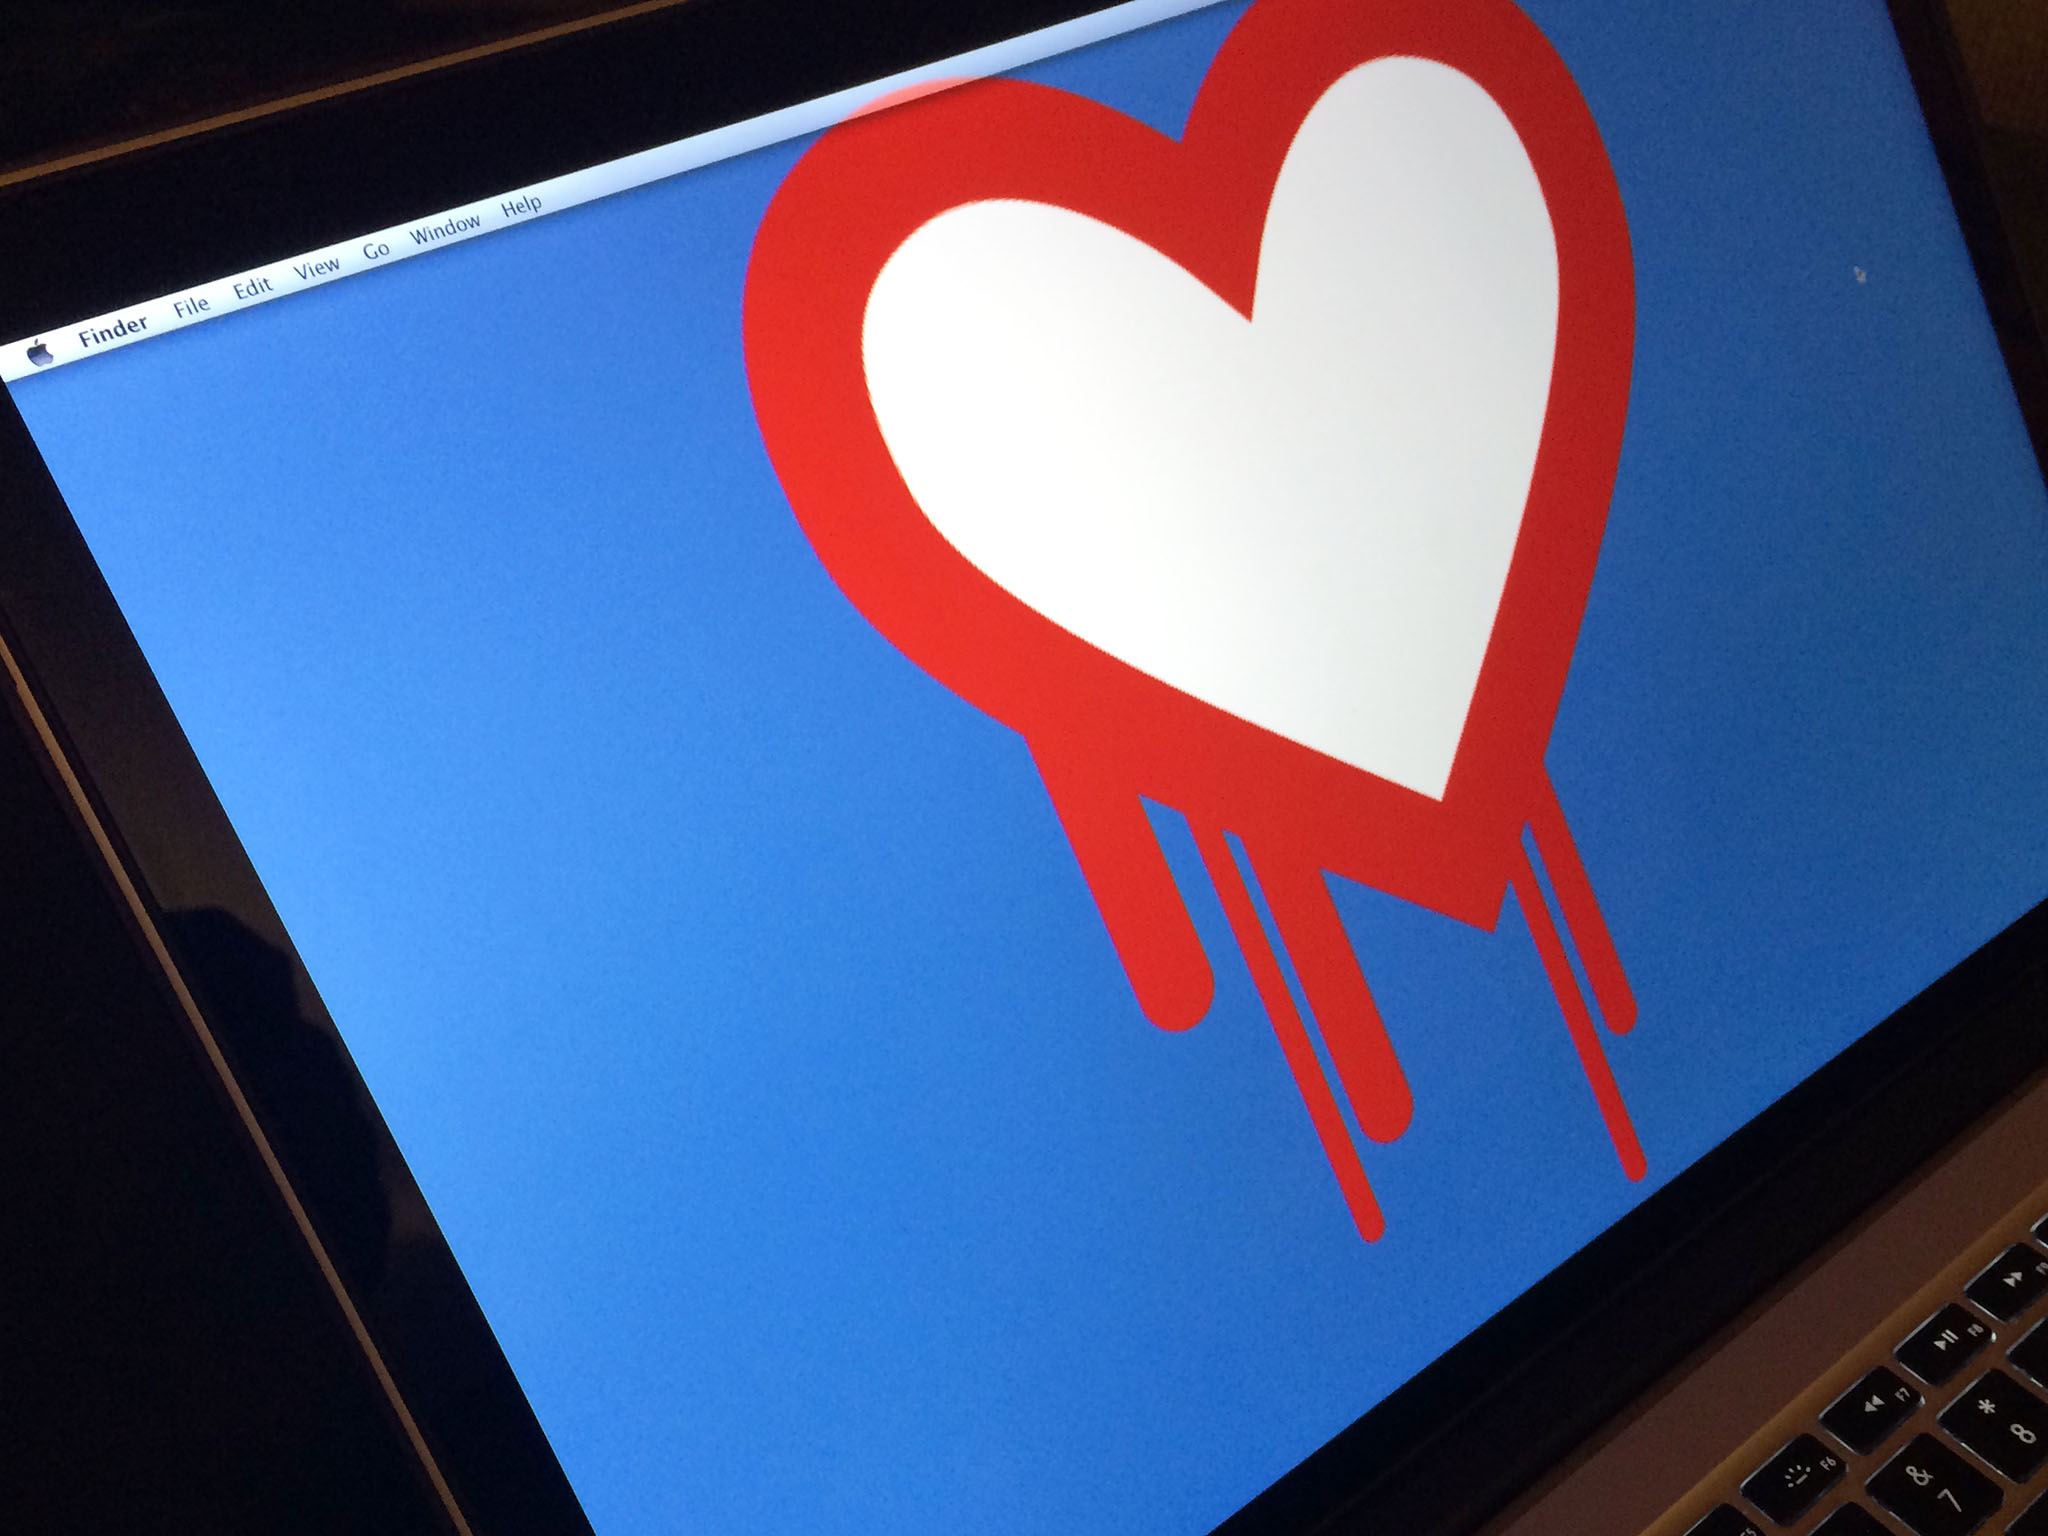 Heartbleed, the new OpenSSL hack: How does it affect OS X and iOS?